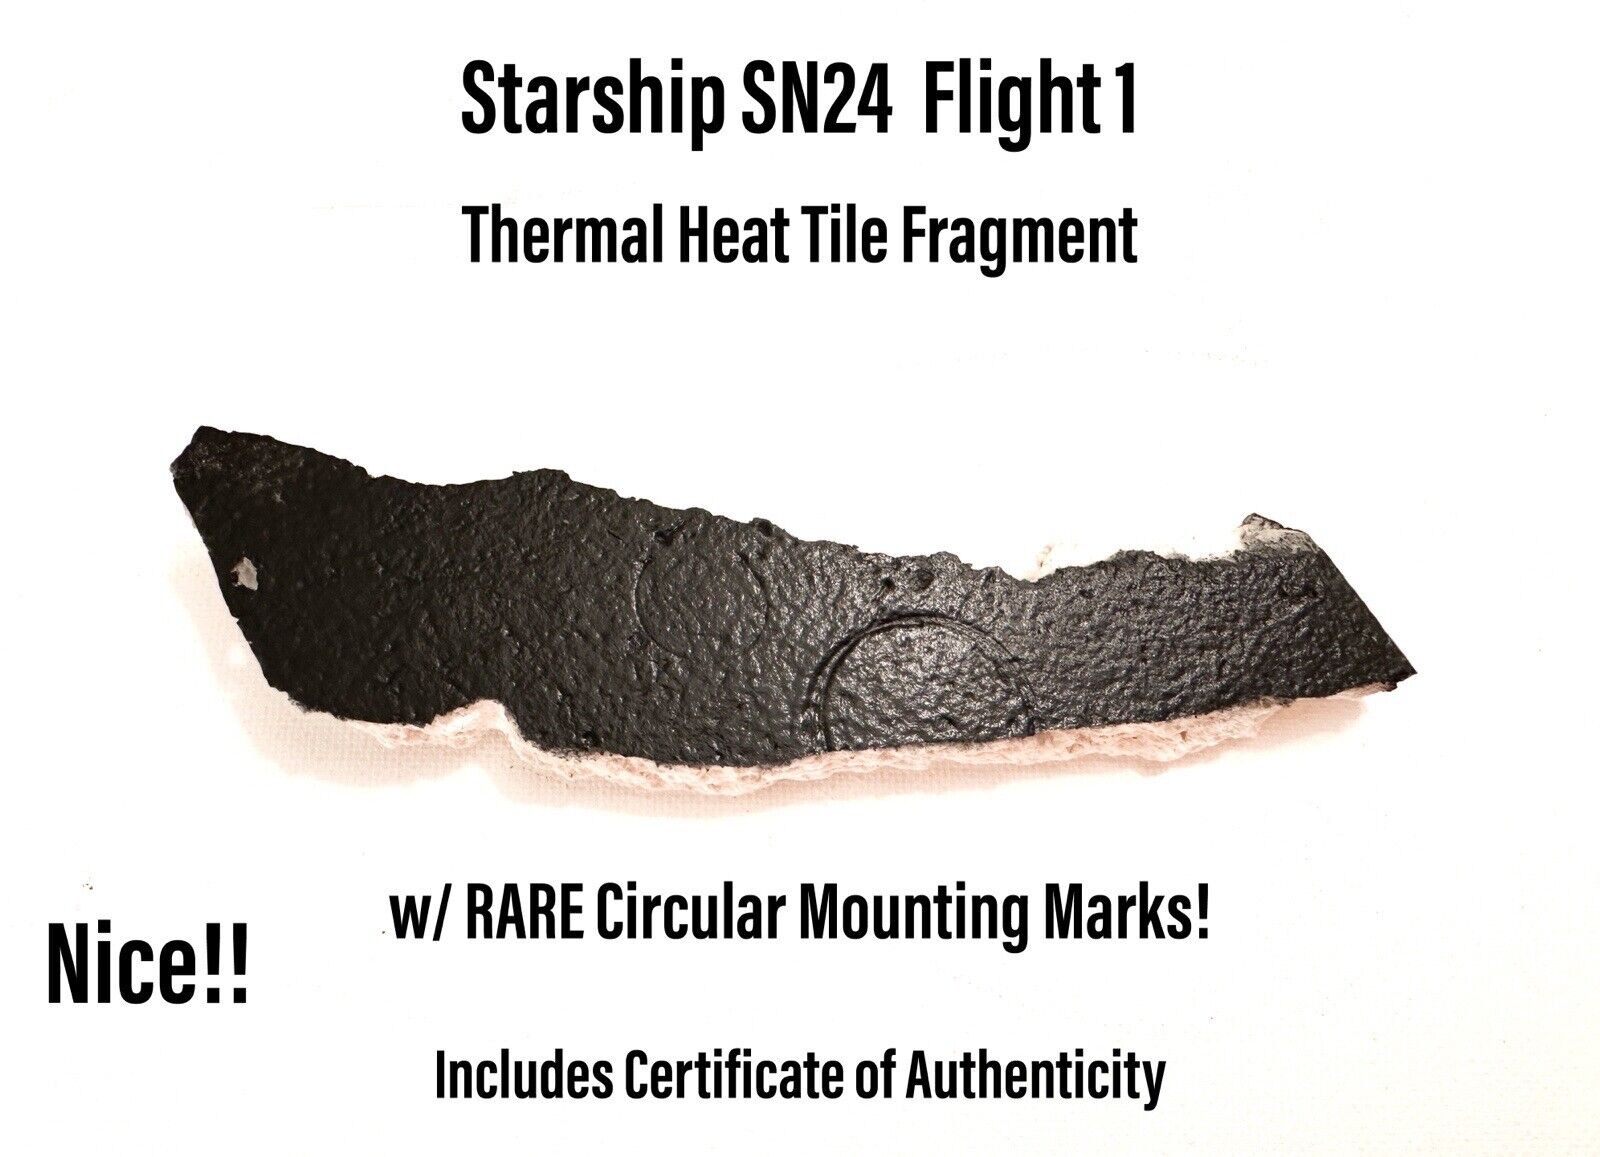 SpaceX Starship SN24 S24 IFT1 Heat Shield Tile Surface Section w/ Mounting Marks